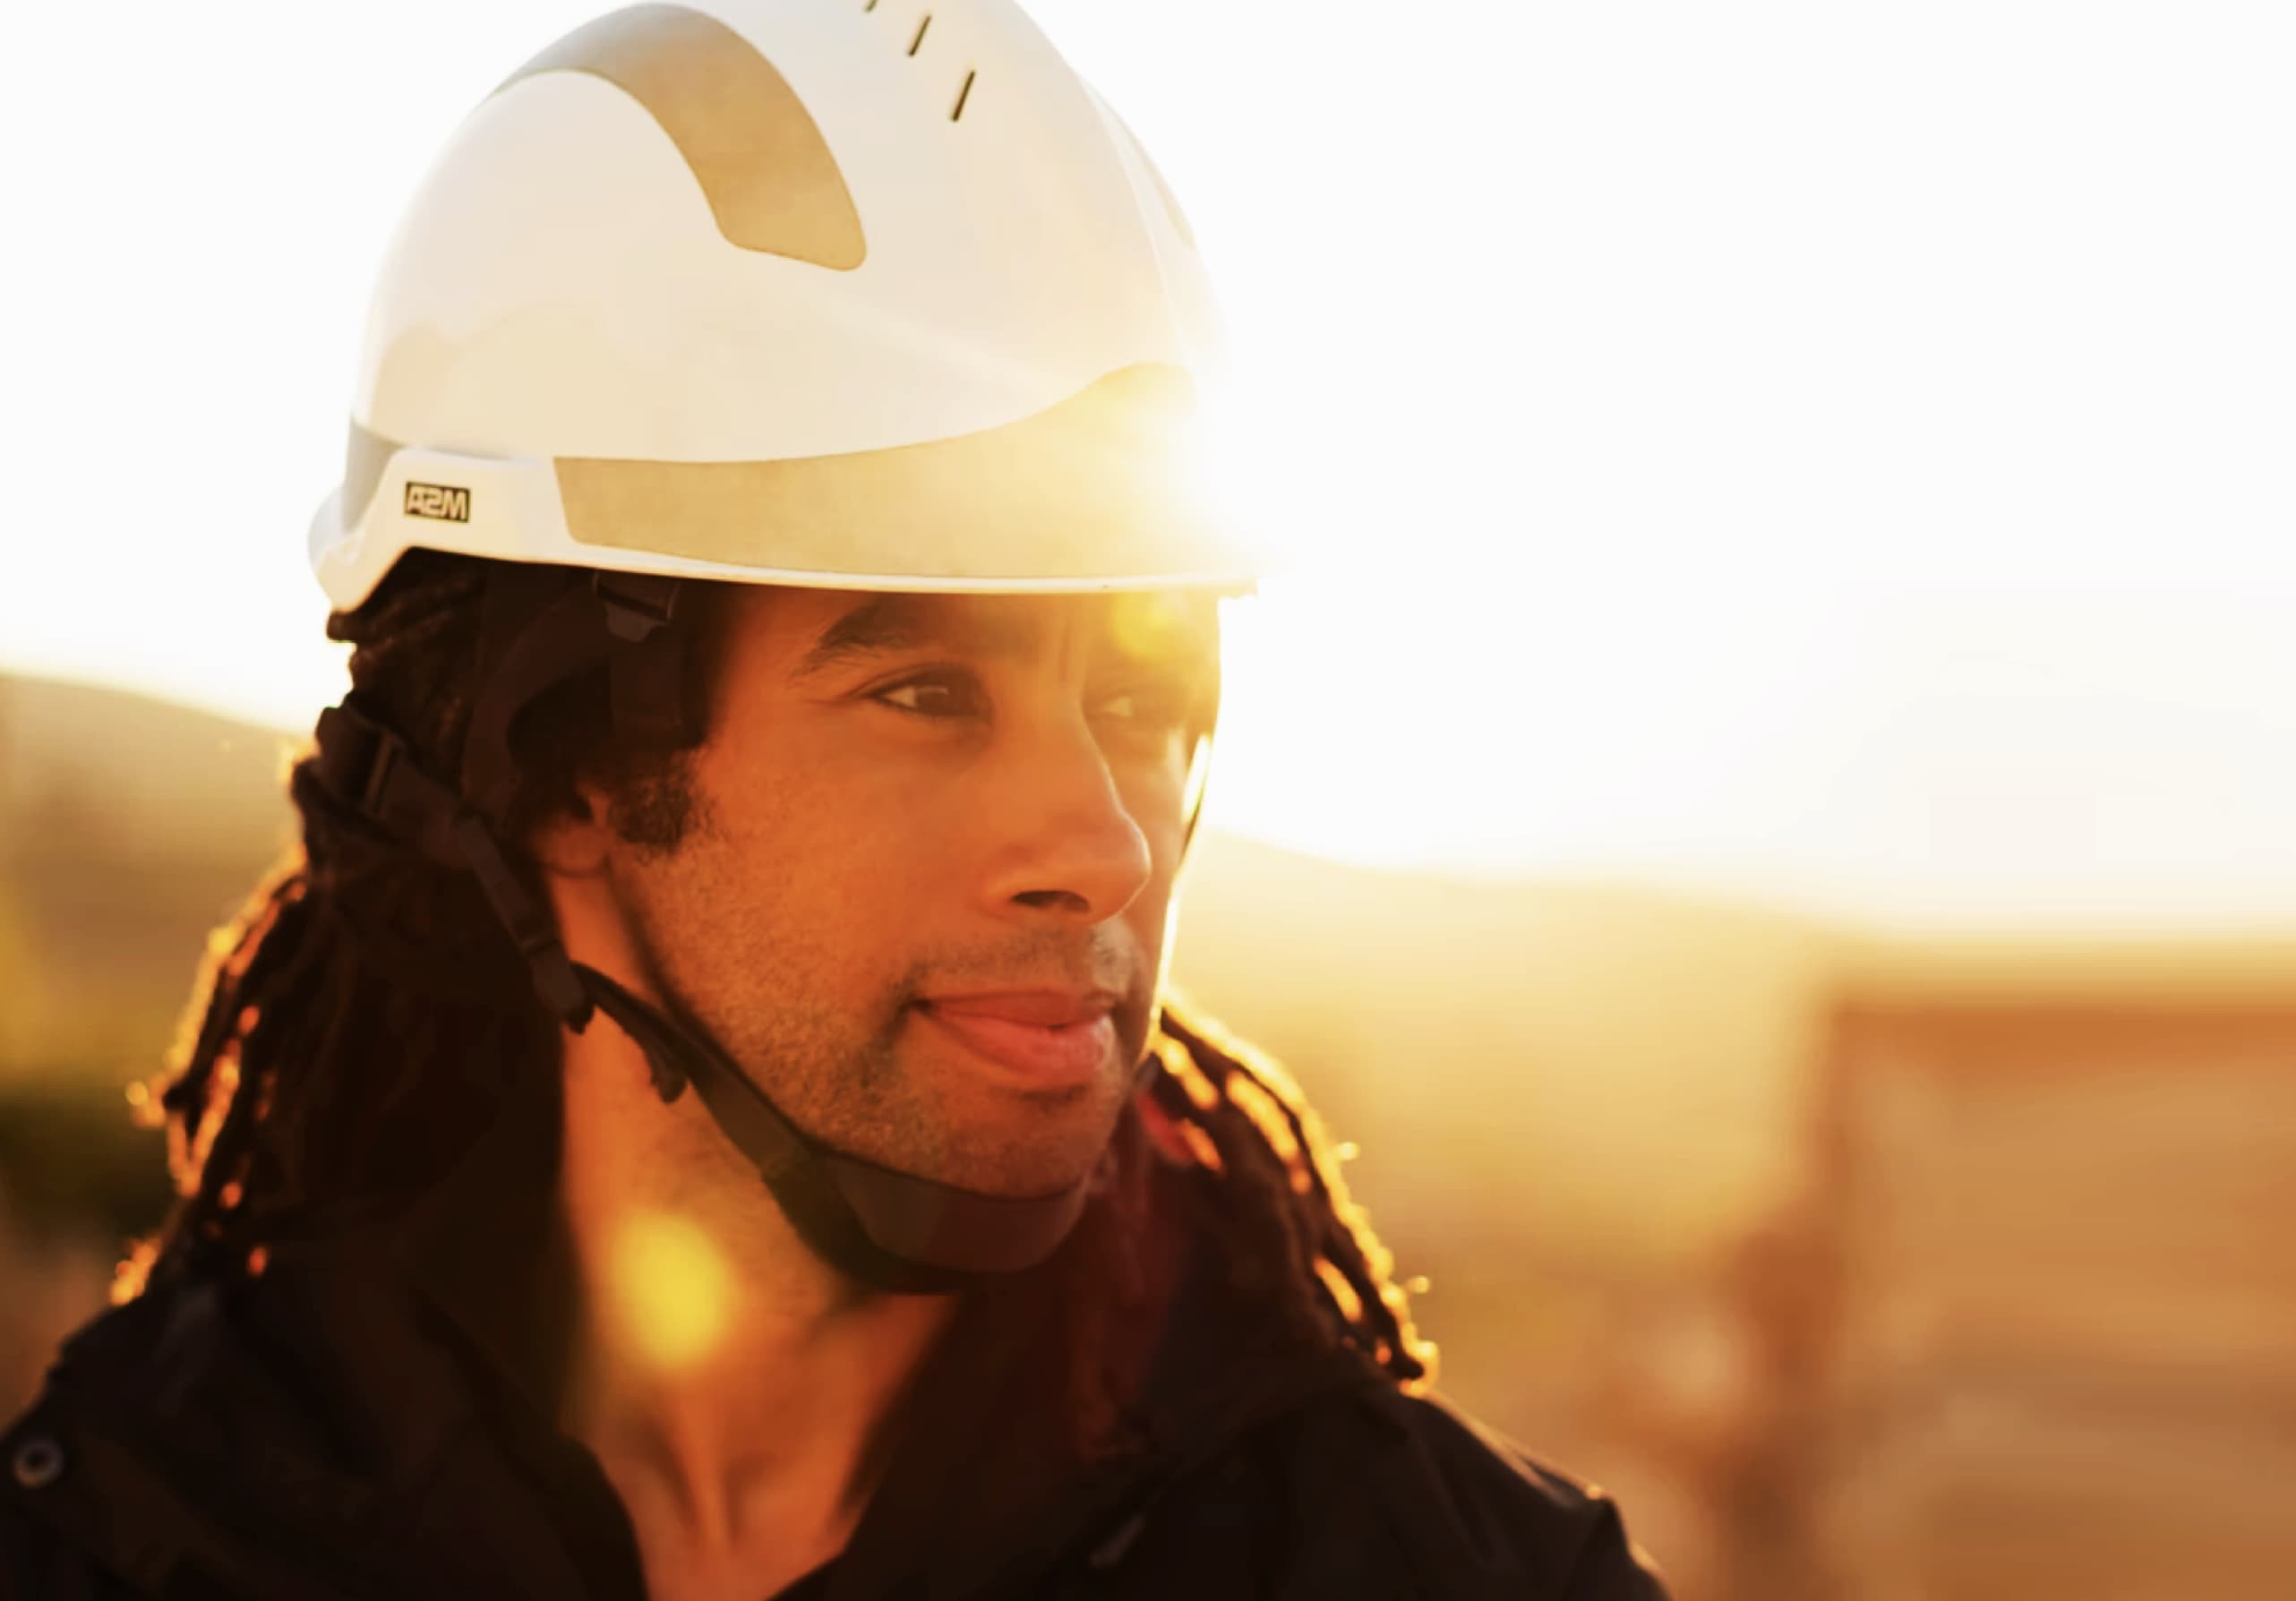 Close up headshot photograph of worker in a hardhat with sunset in background